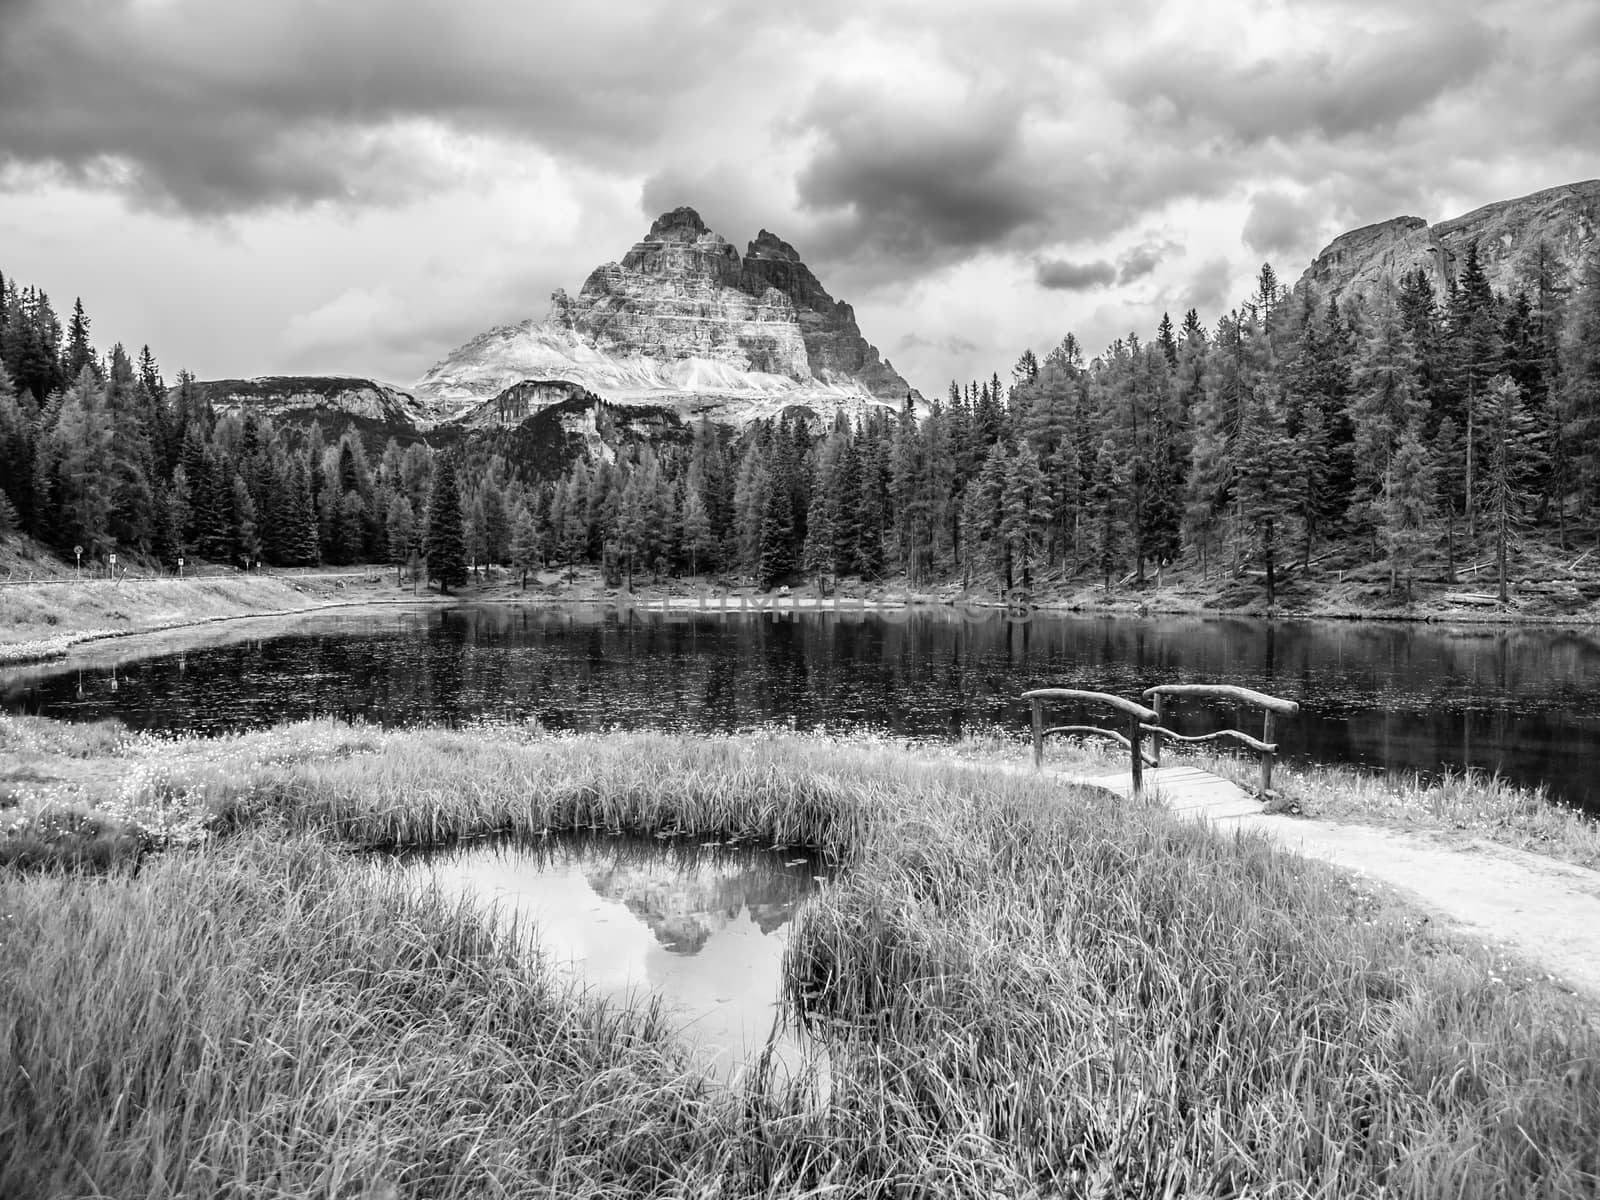 Tre Cime di Lavaredo Mountain reflected in water od Antorno Lake, Dolomites, Italy by pyty